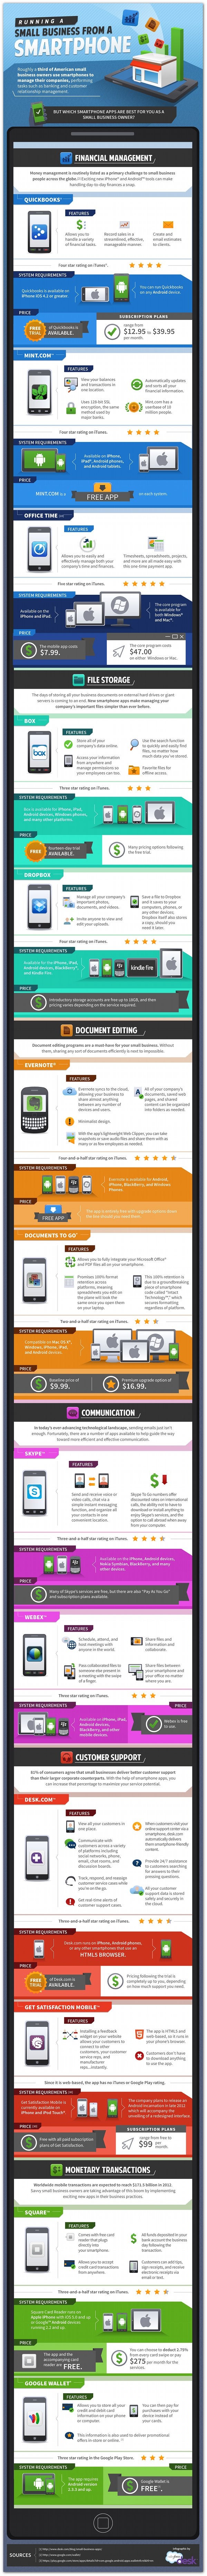 Smartphone apps for small business